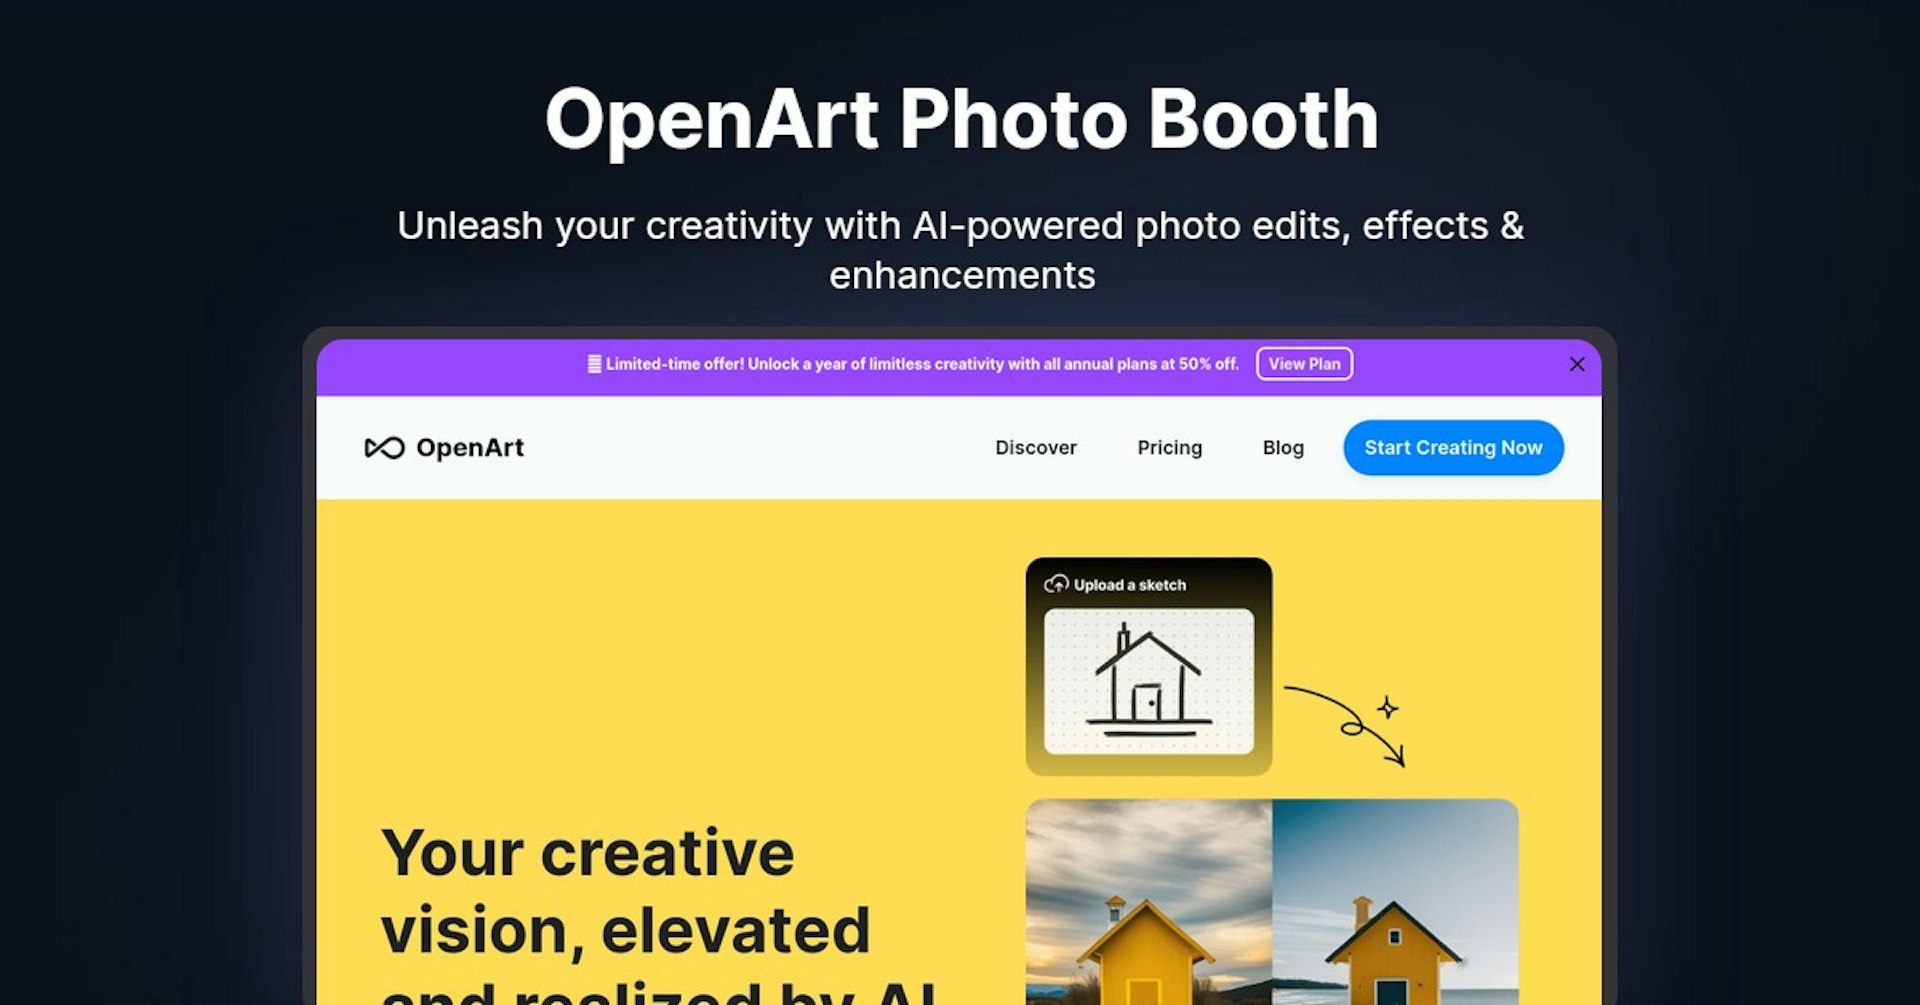 OpenArt Photo Booth